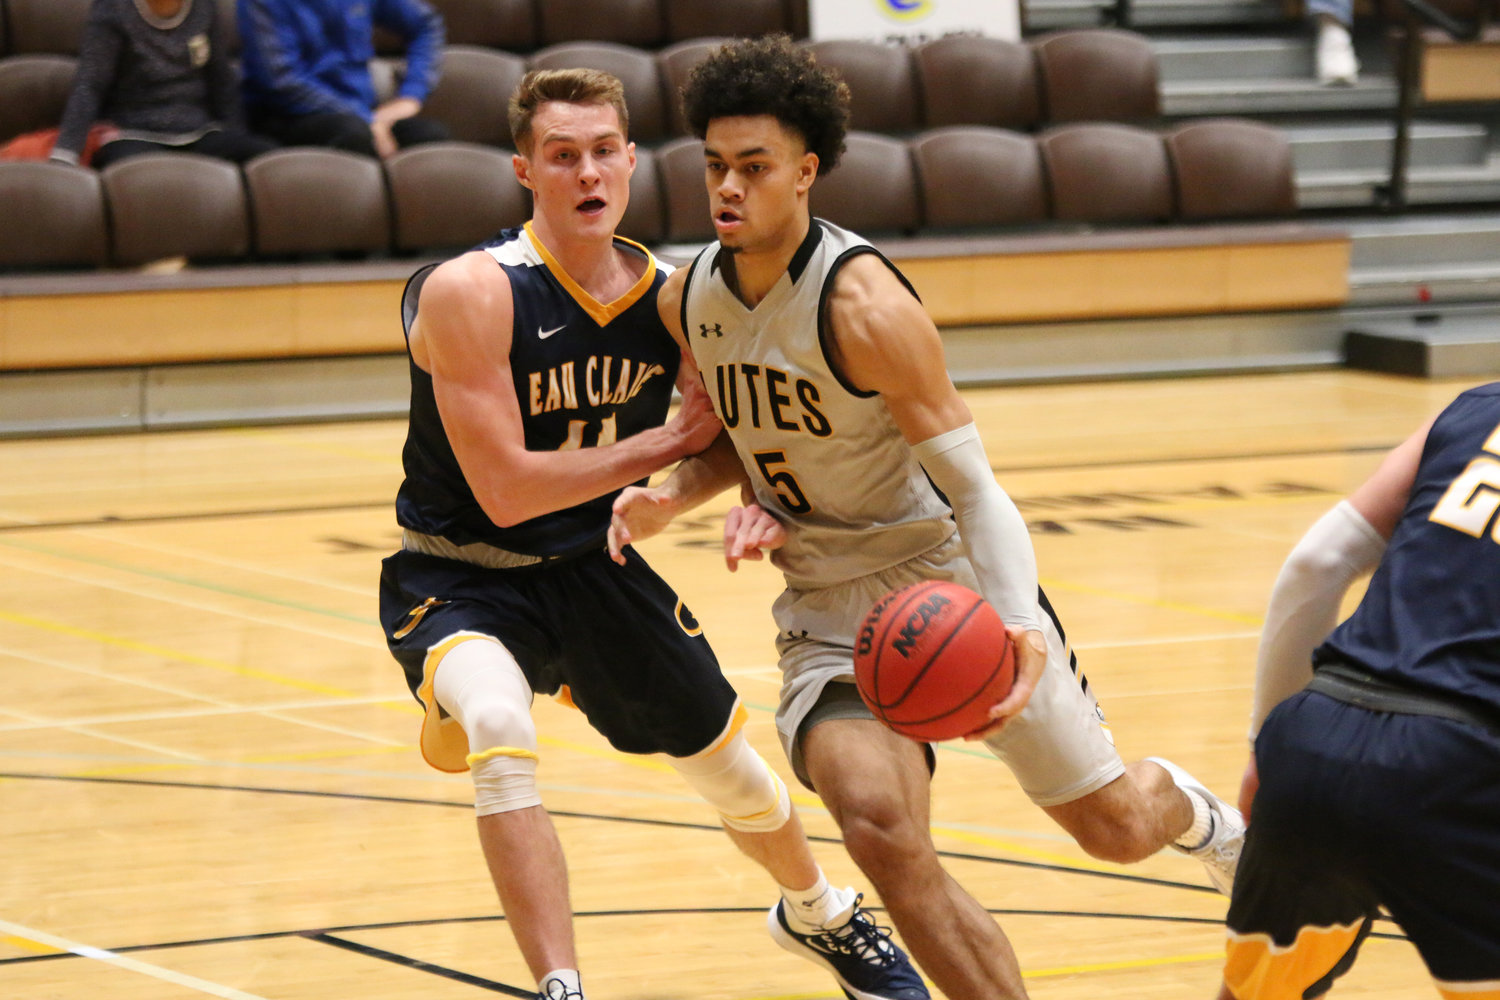 Courtesy Photo / PLU Athletics Pacific Lutheran University's Jordan Thomas drives to the hoop against University of Wisconsin-Eau Claire on Nov. 30, 2019, in Olson Gymnasium in Tacoma.